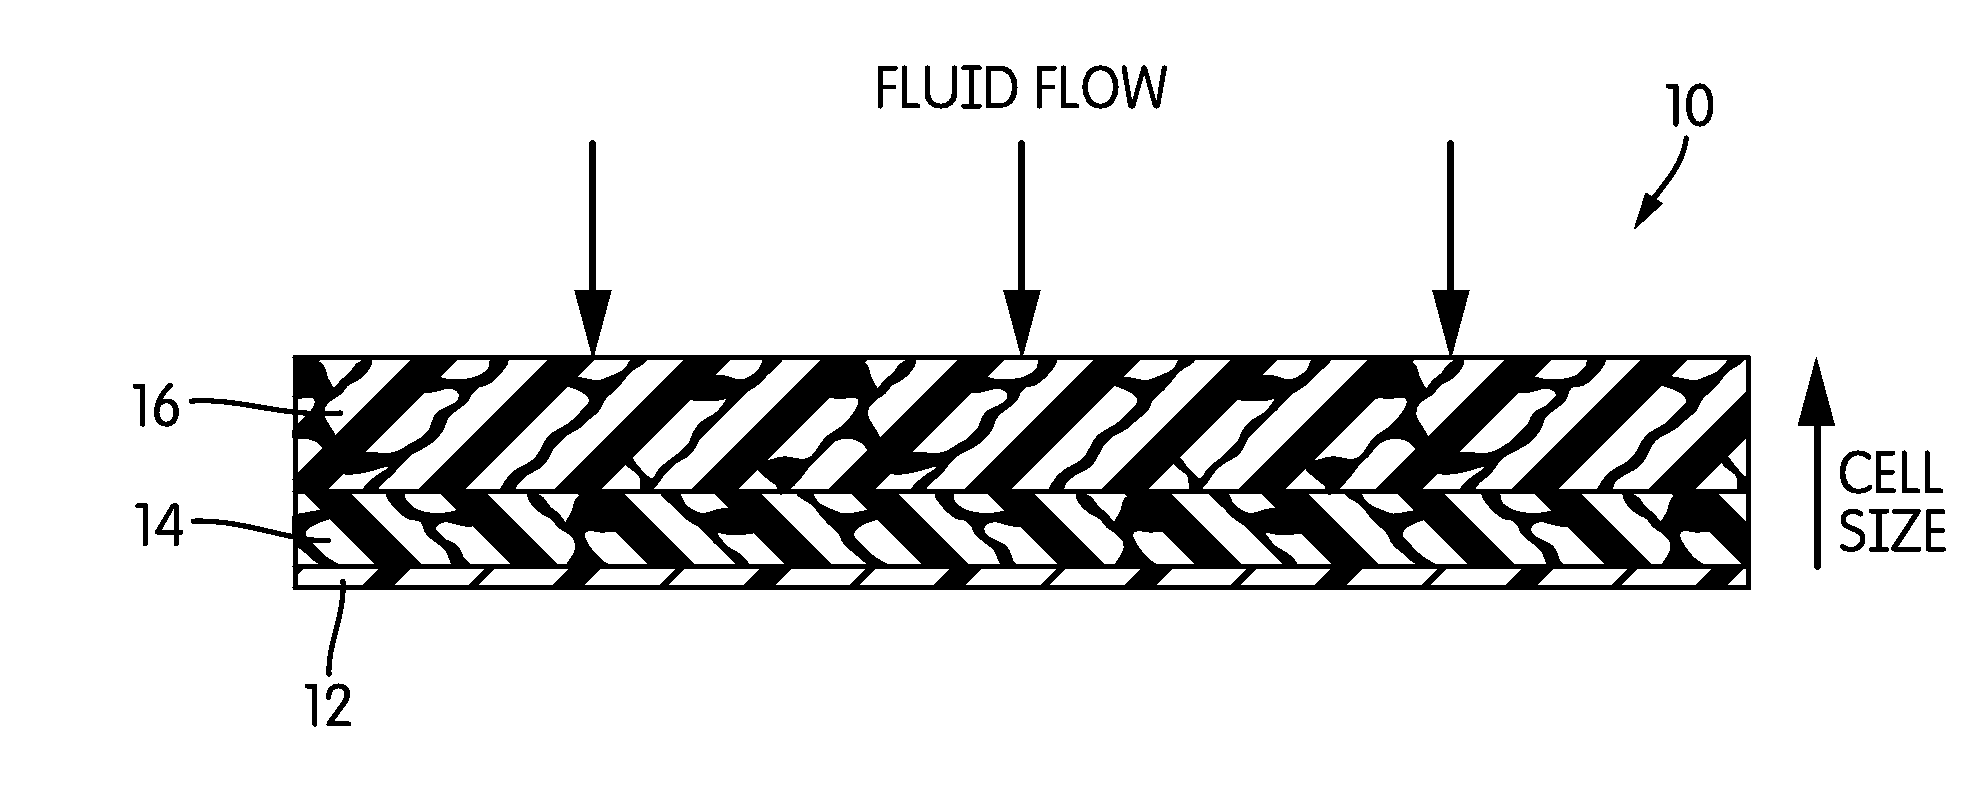 Methods for Using Polymer Foam Absorbent Materials in Wound Dressings